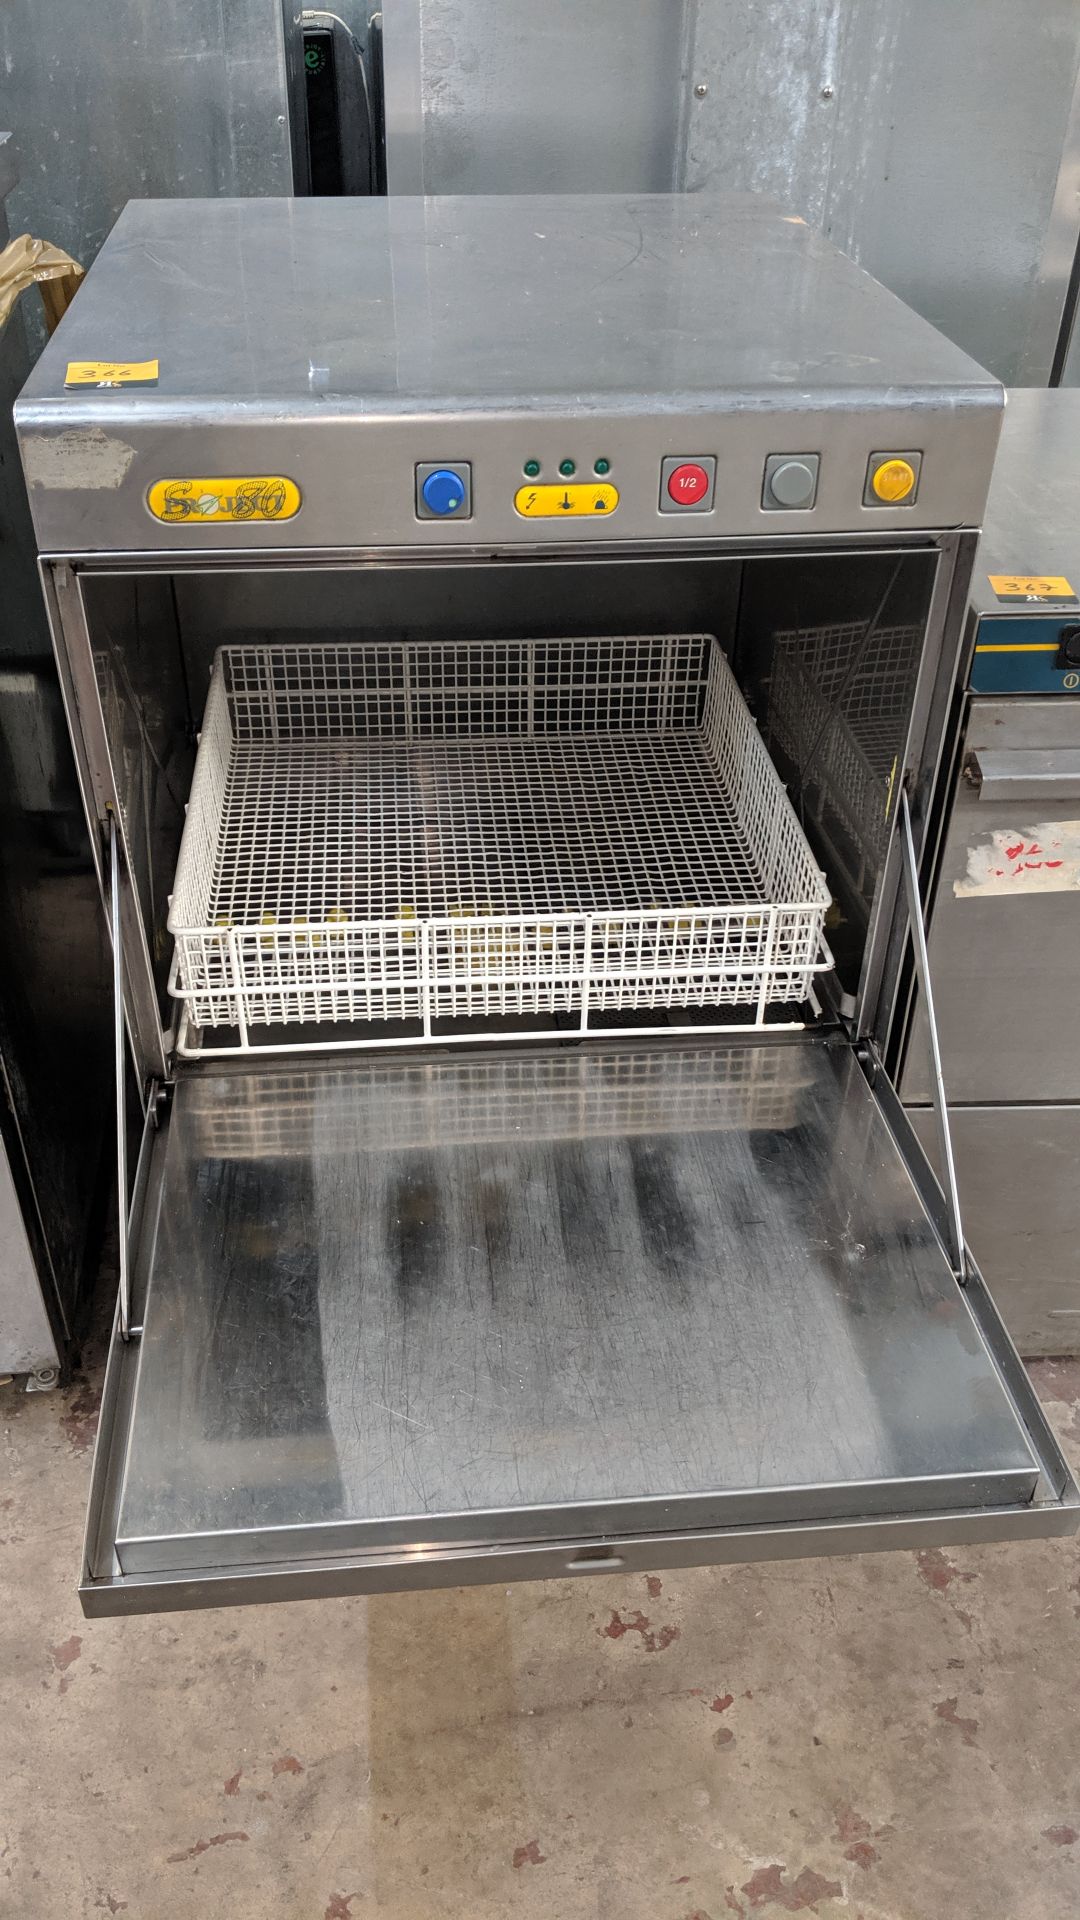 Project S80 stainless steel glass washer IMPORTANT: Please remember goods successfully bid upon must - Image 3 of 4